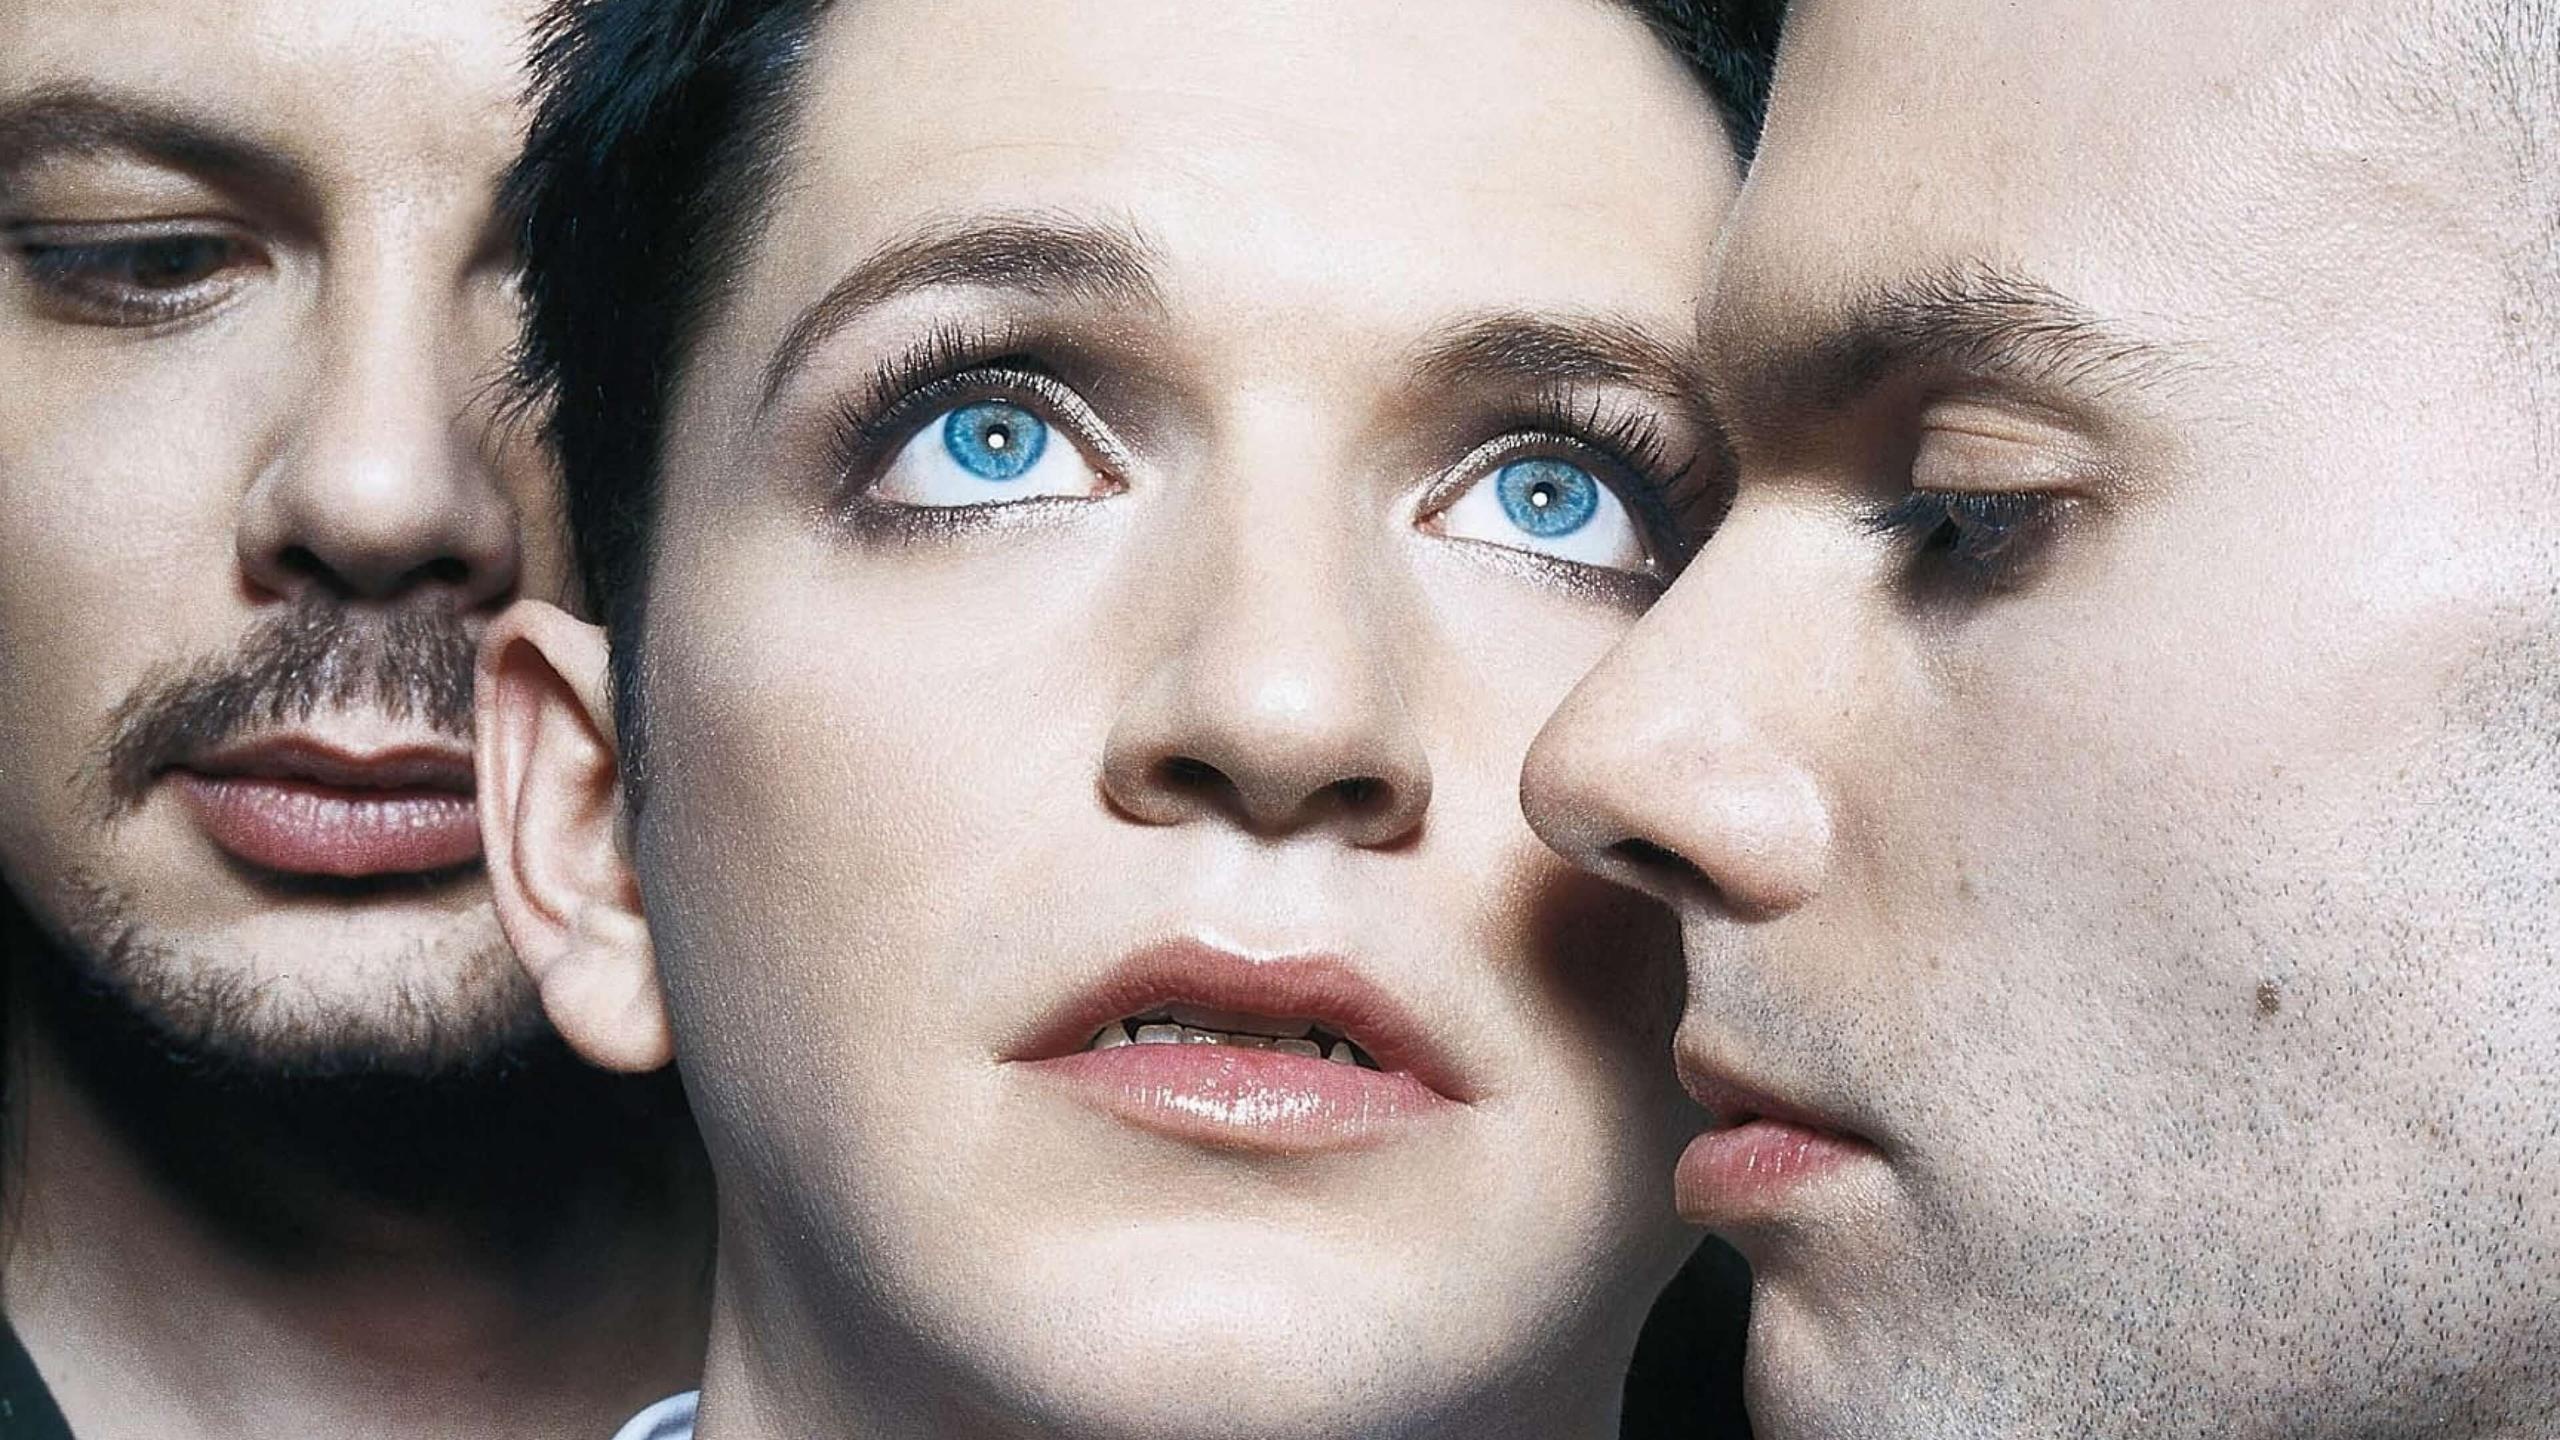 Placebo: An alternative rock band, Renowned for their androgynous appearance. 2560x1440 HD Background.